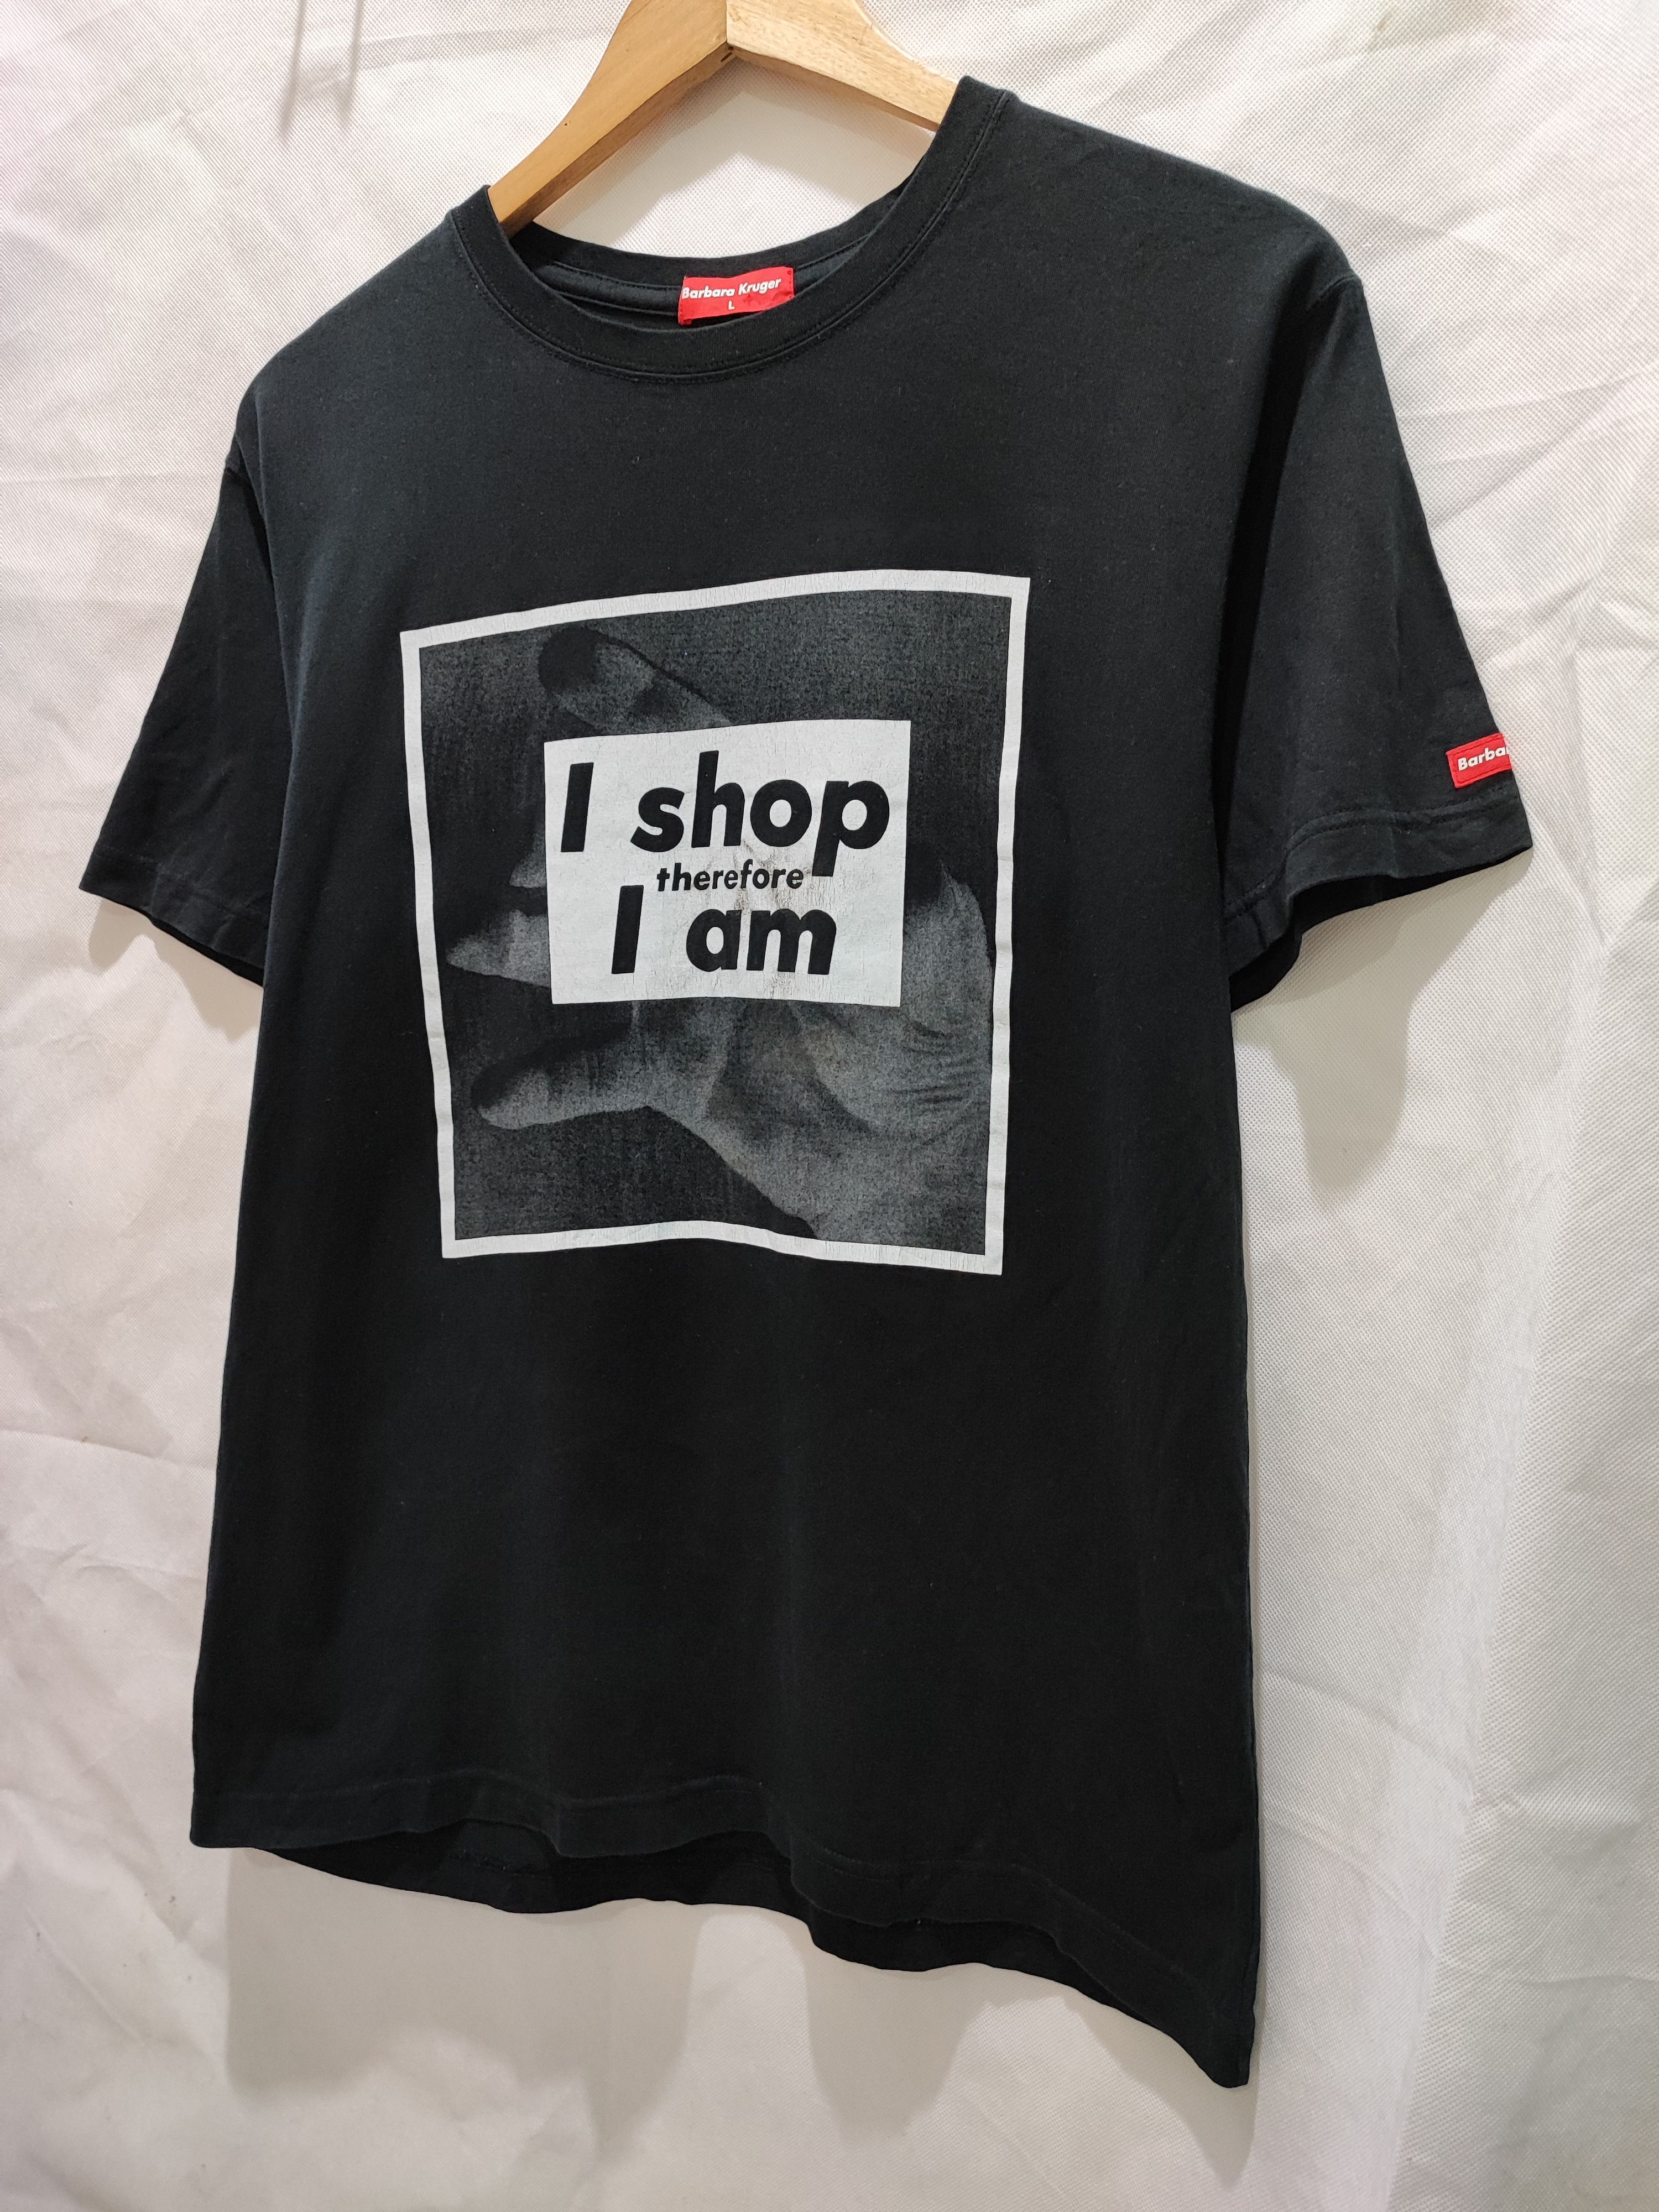 Uniqlo Rare!!! Vintage Barbara Kruger Art I Shop Therefore Tshirt Size L / US 10 / IT 46 - 2 Preview